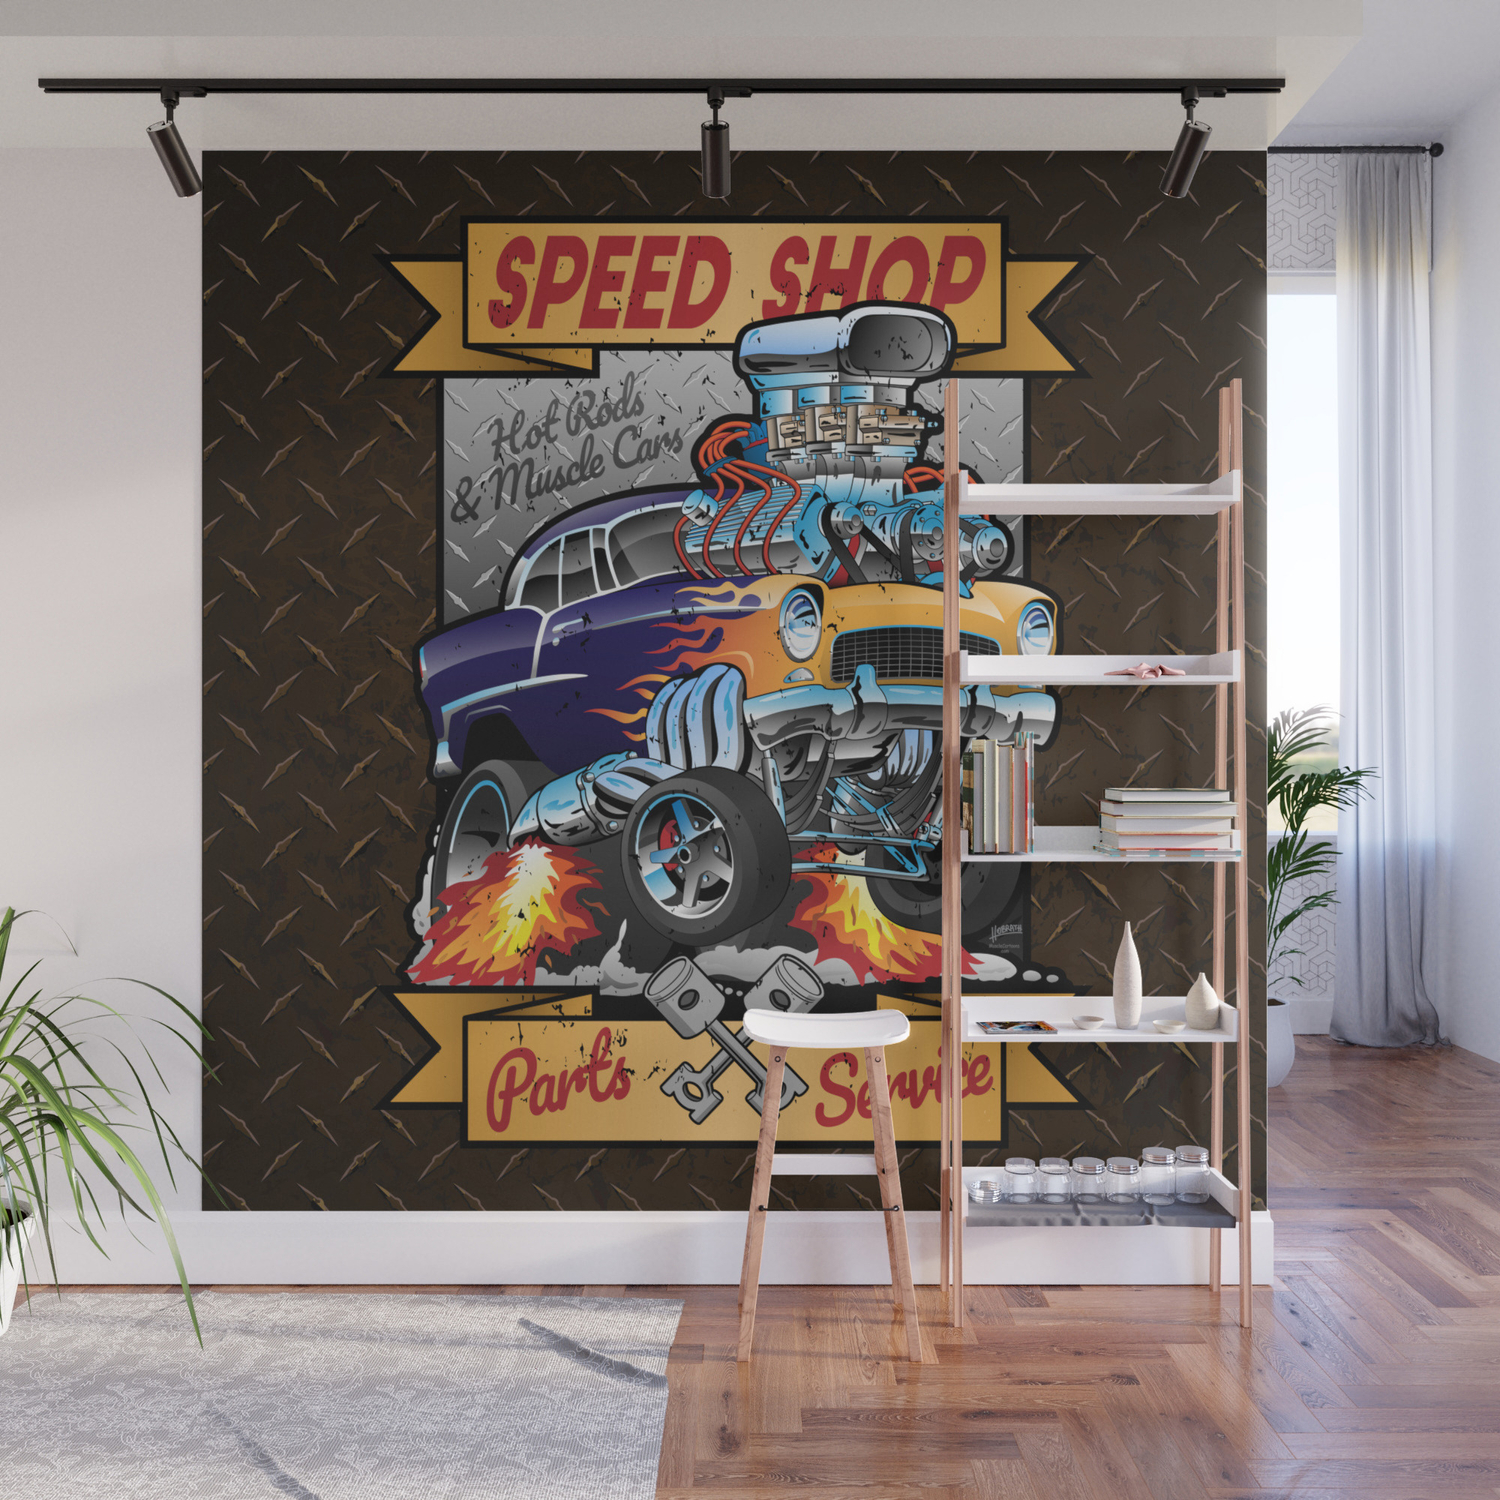 Speed Shop Hot Rod Muscle Car Parts and Service Vintage Cartoon  Illustration Wall Mural by hobrath | Society6